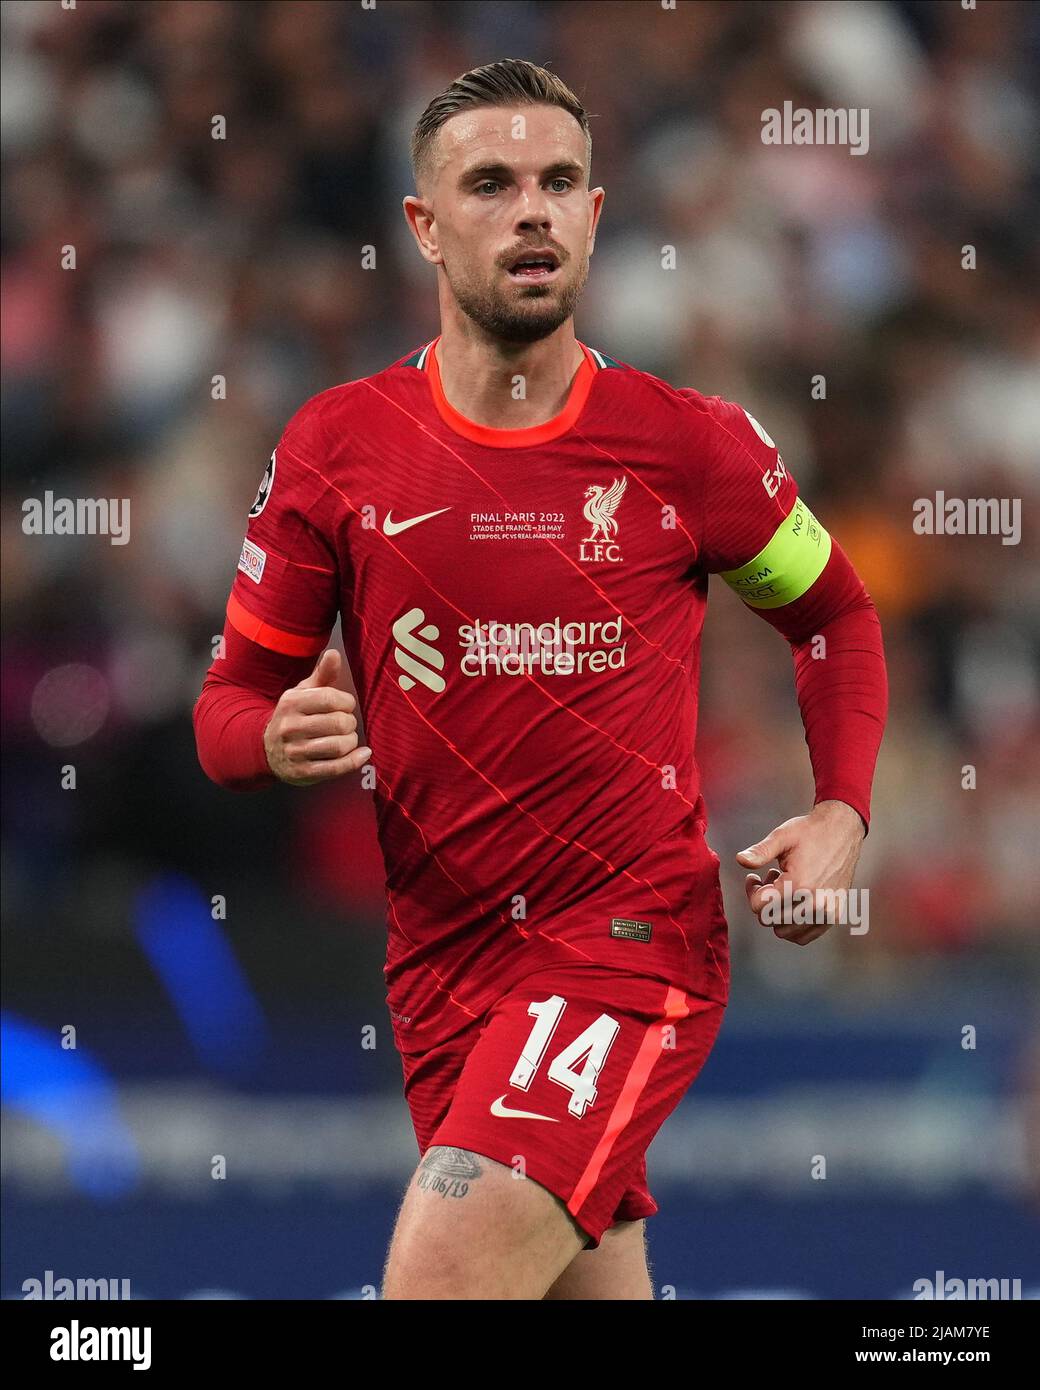 Jordan Henderson of Liverpool FC during the UEFA Champions League Final match between Liverpool FC and Real Madrid played at Stade de France on May 28, 2022 in Paris, France. (Photo by Magma) Stock Photo